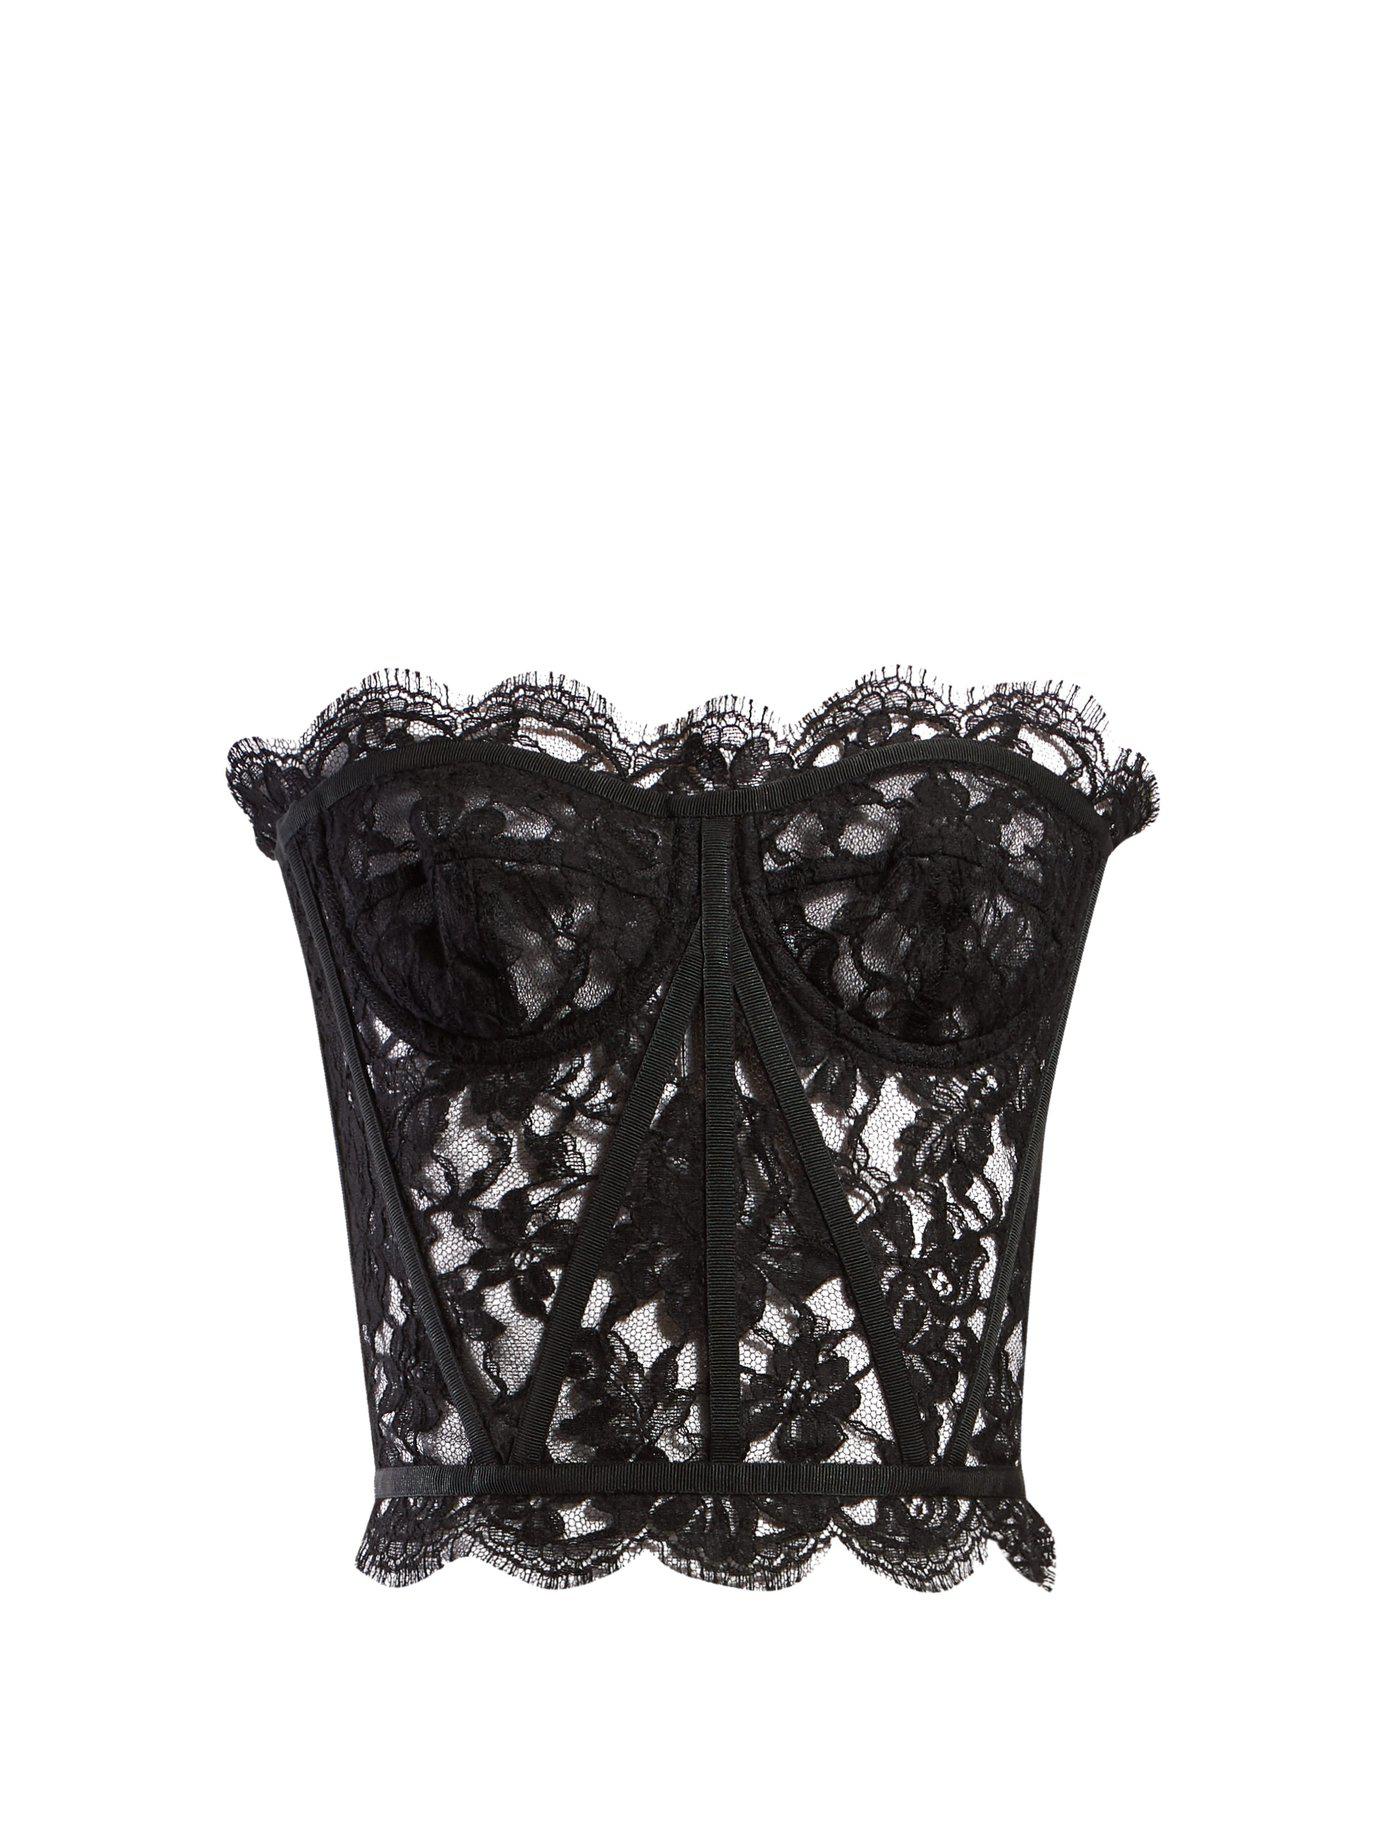 & Gabbana Scallop Edged Lace Bustier Top in Black | Lyst